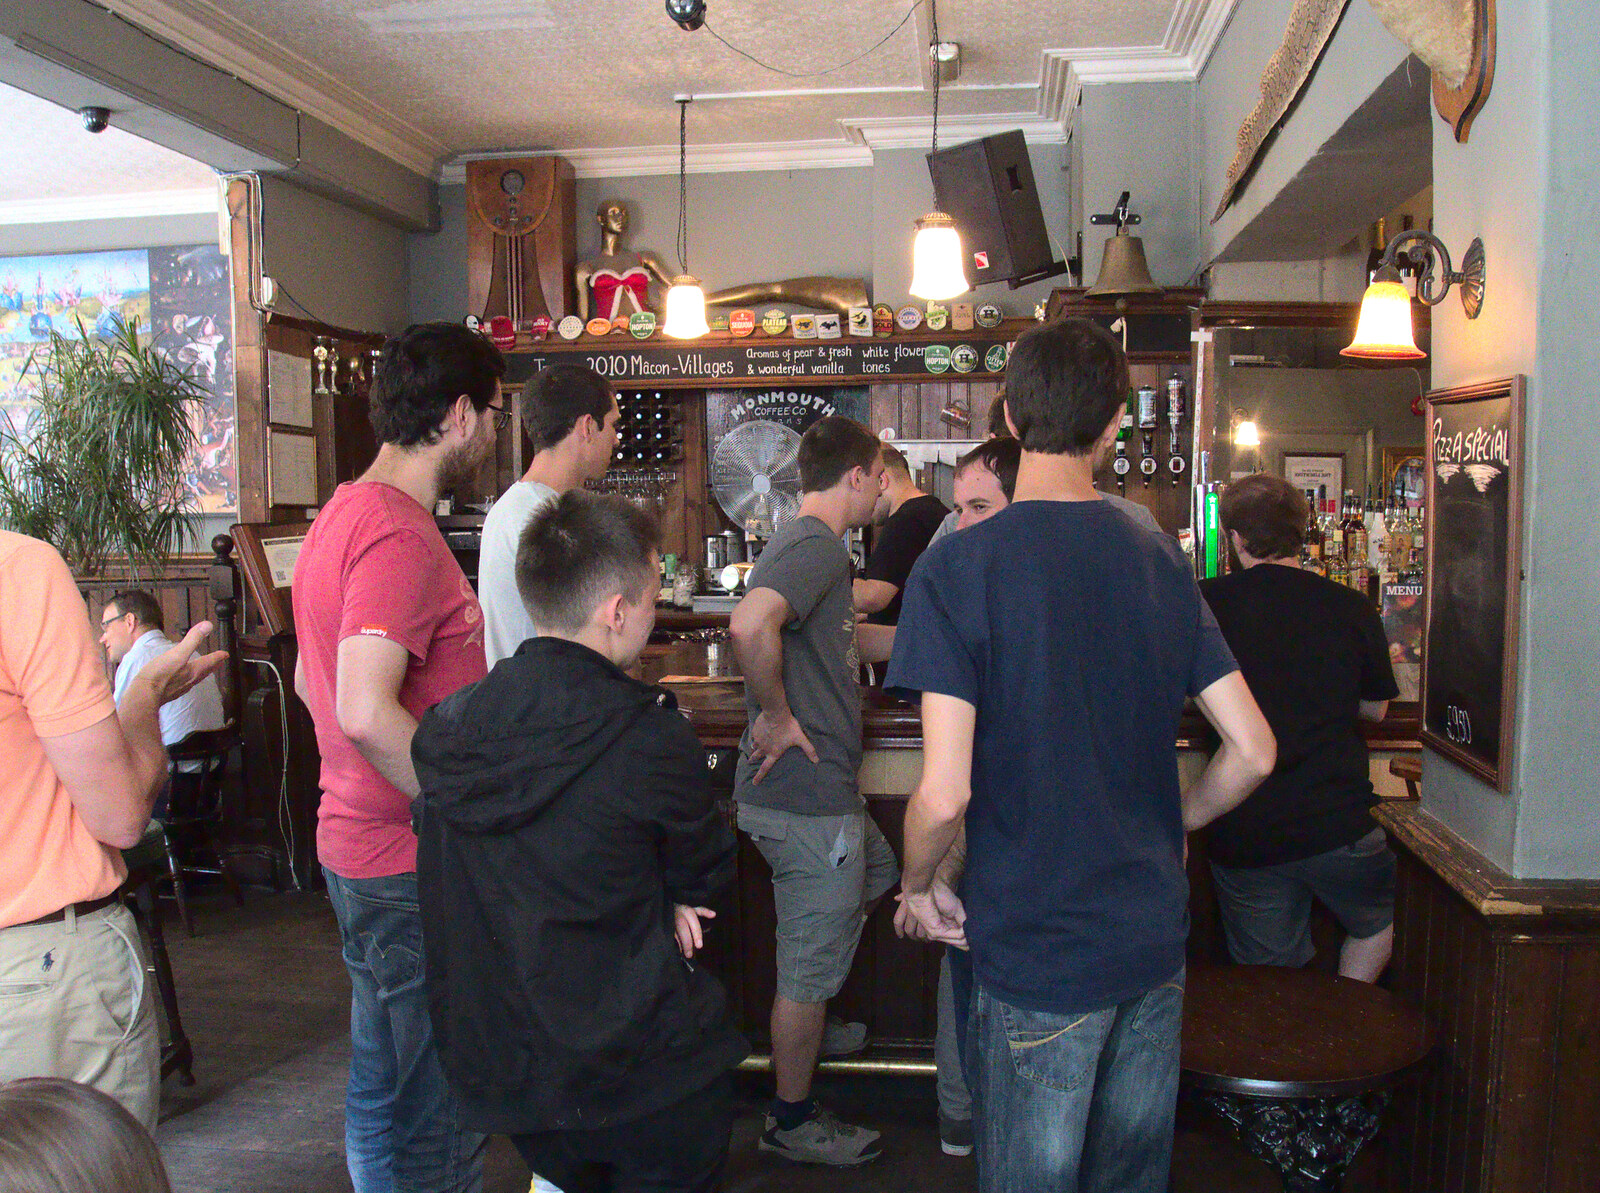 Ordering pizza and drinks in the Libertine from Train Fails, and Pizza Pub, Manningtree and Southwark - 12th August 2014